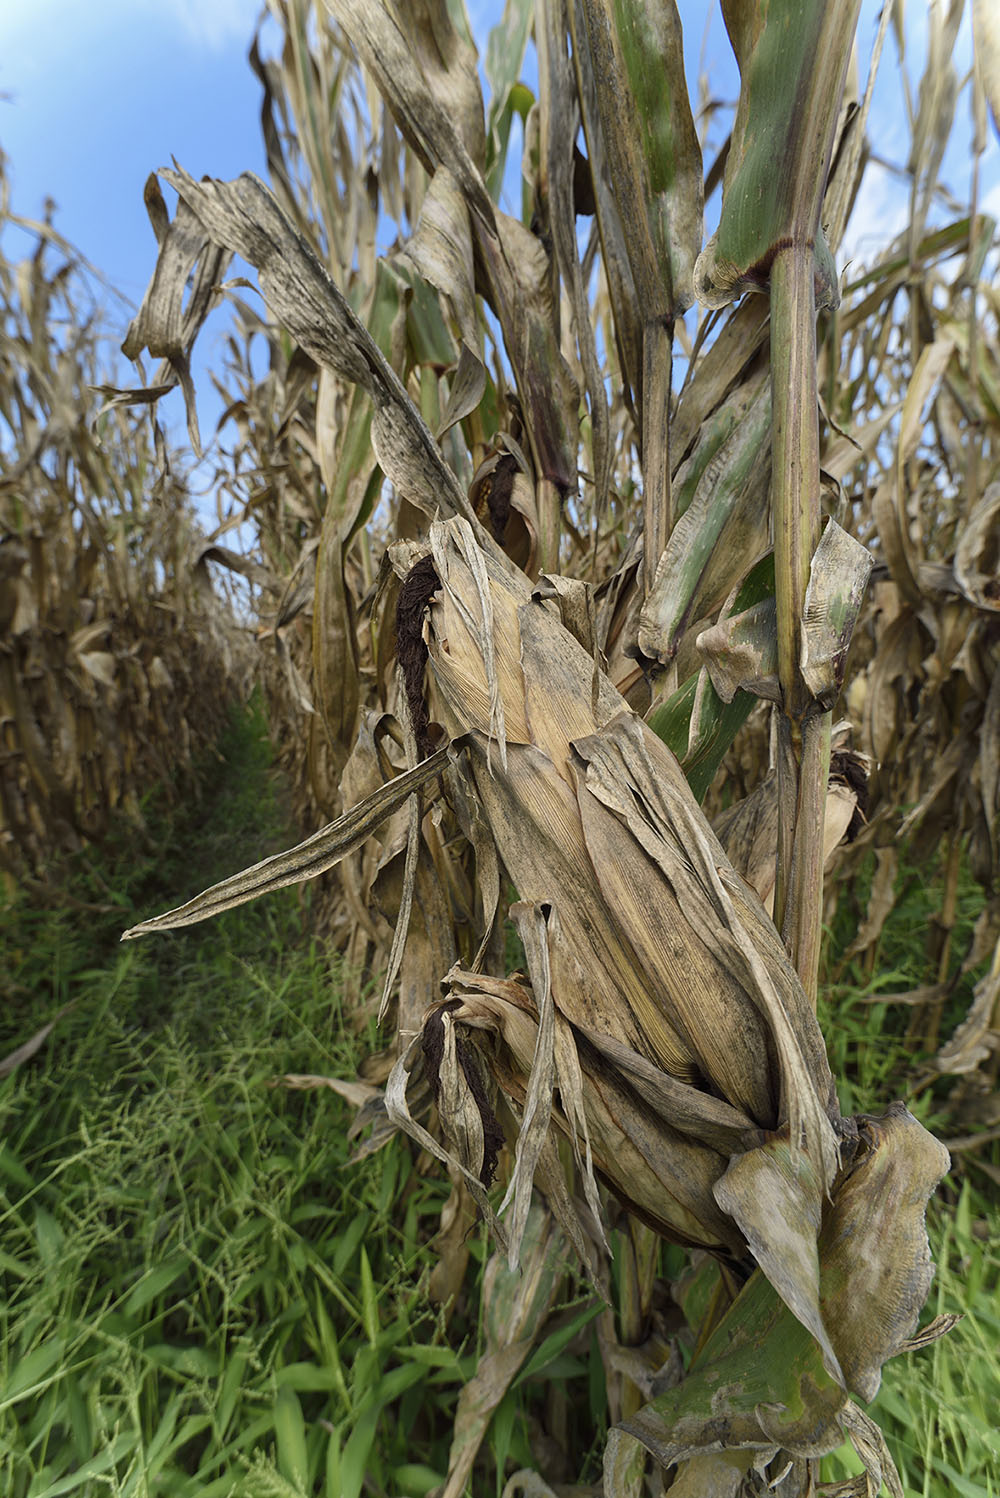 When should sweet corn be harvested?